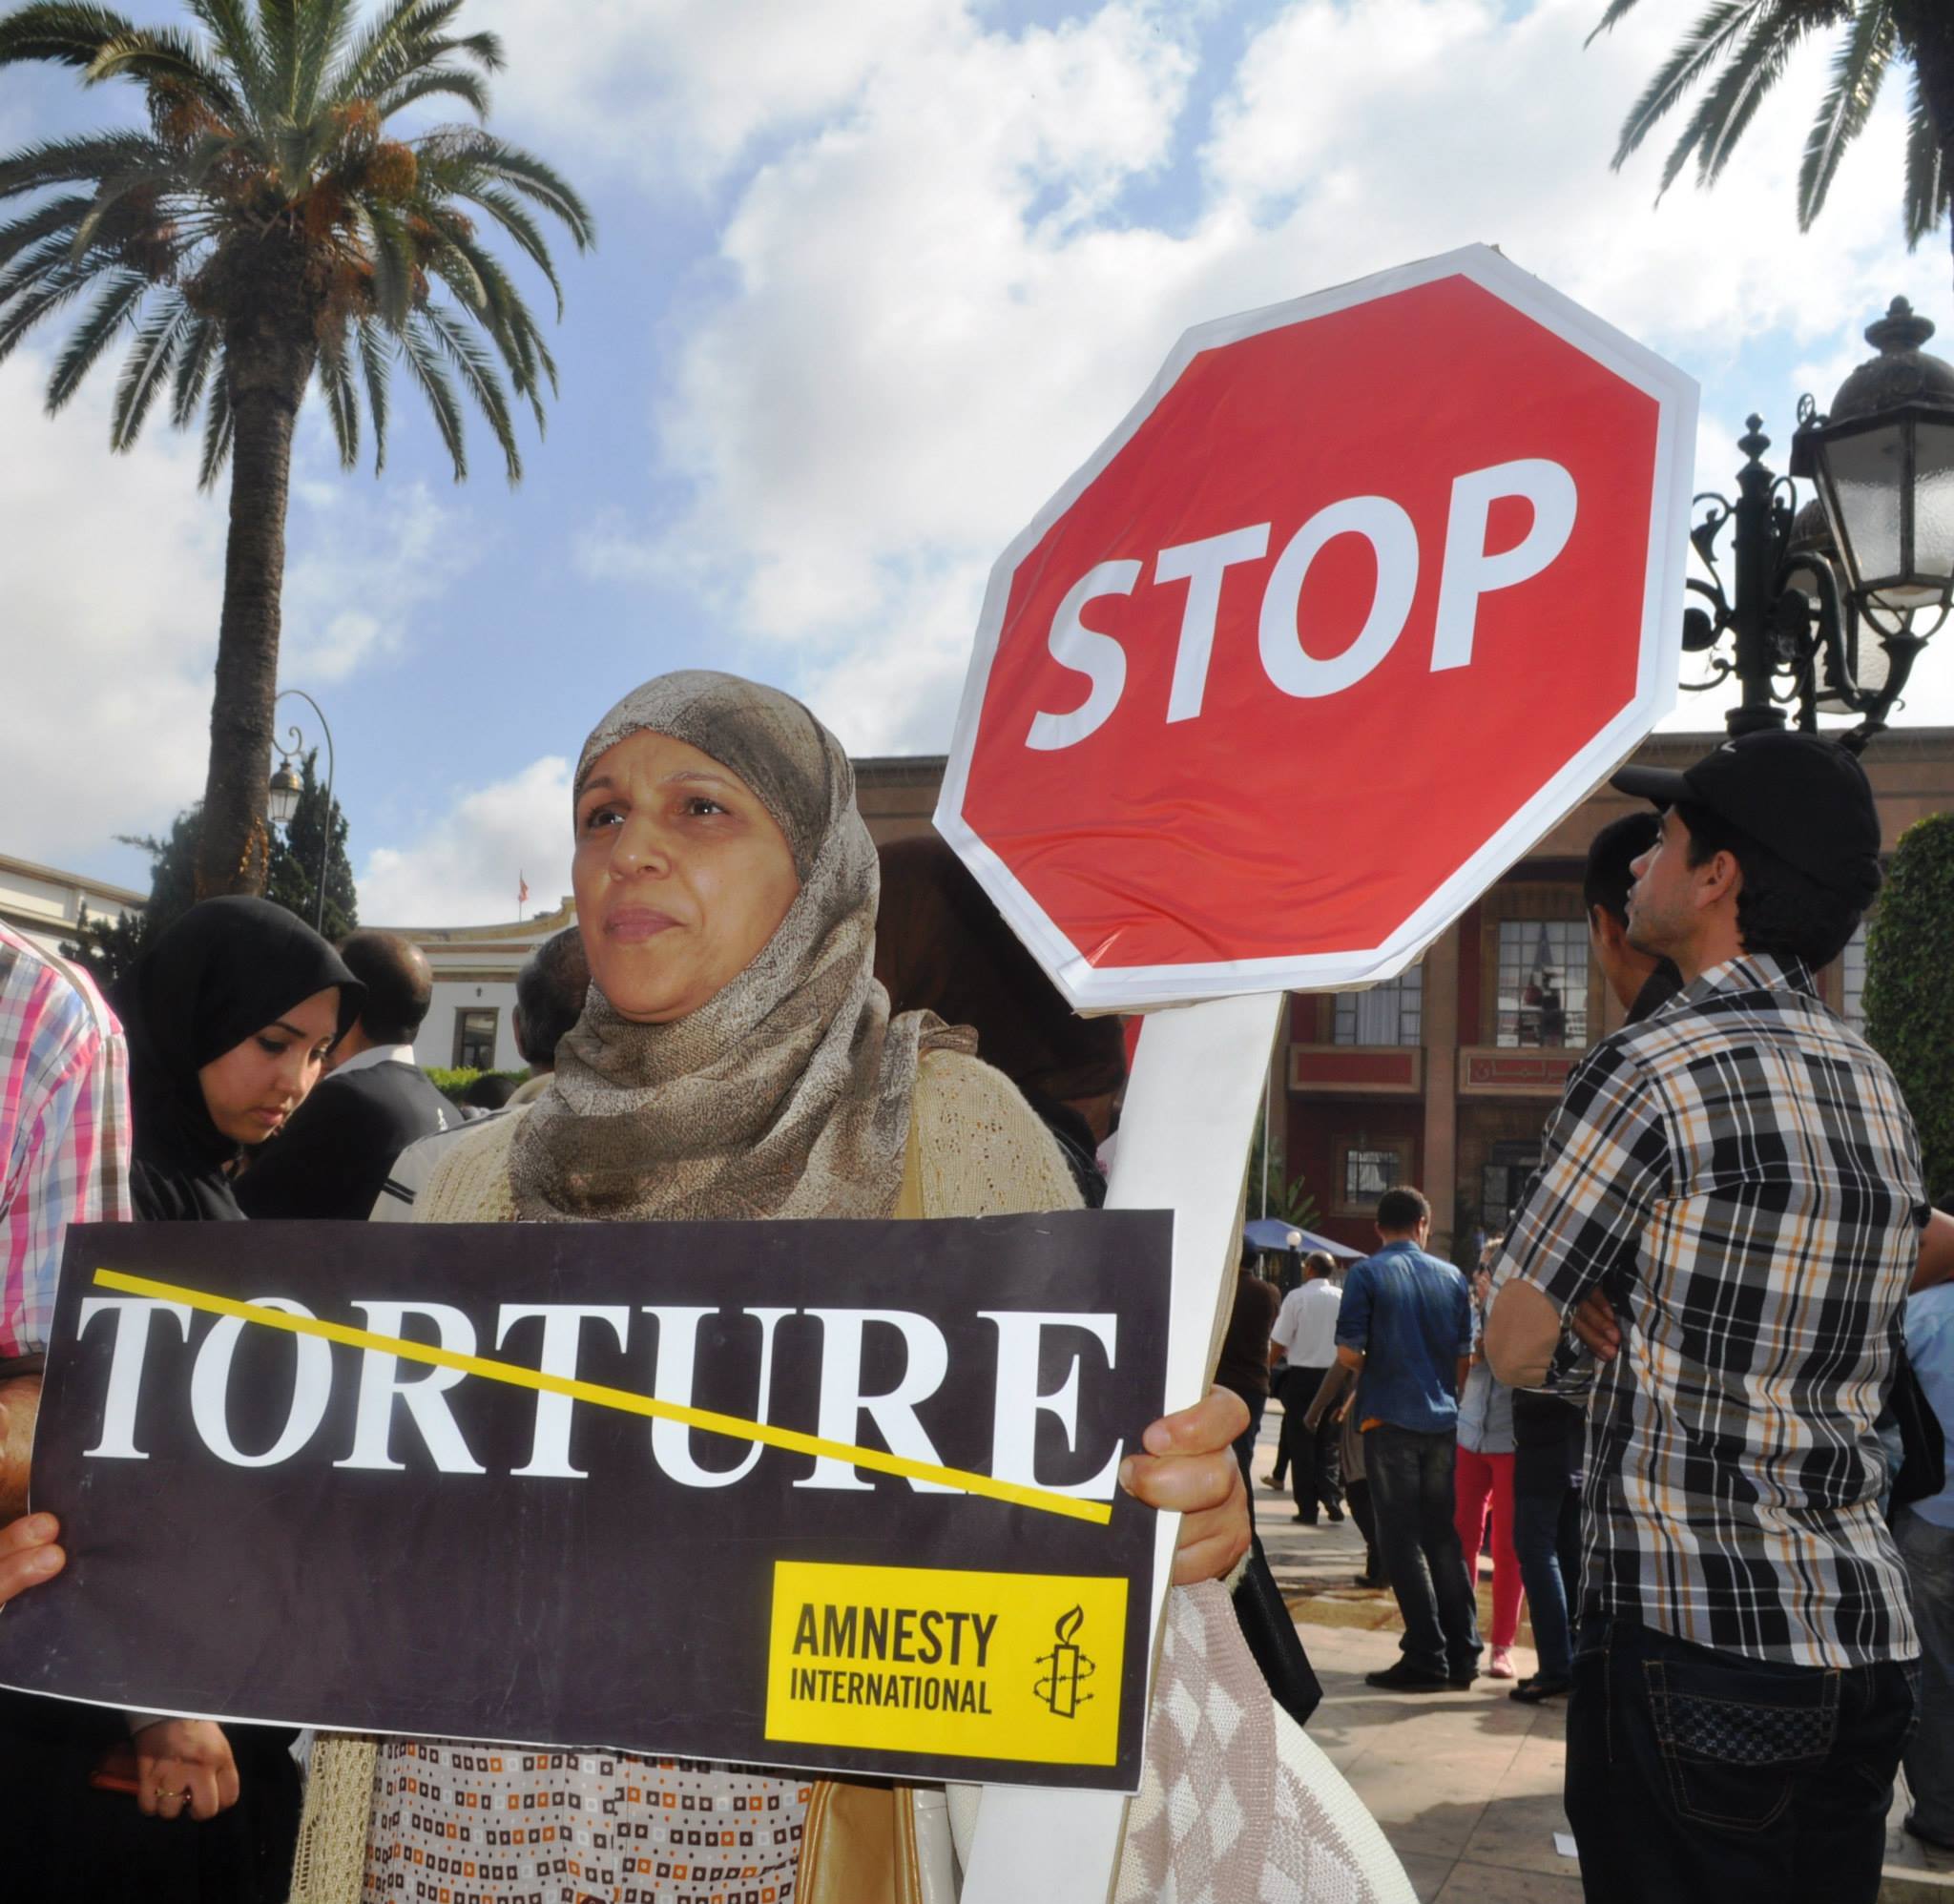 Some photos of some of AI Morocco actions on Stop Torture. Stop sign